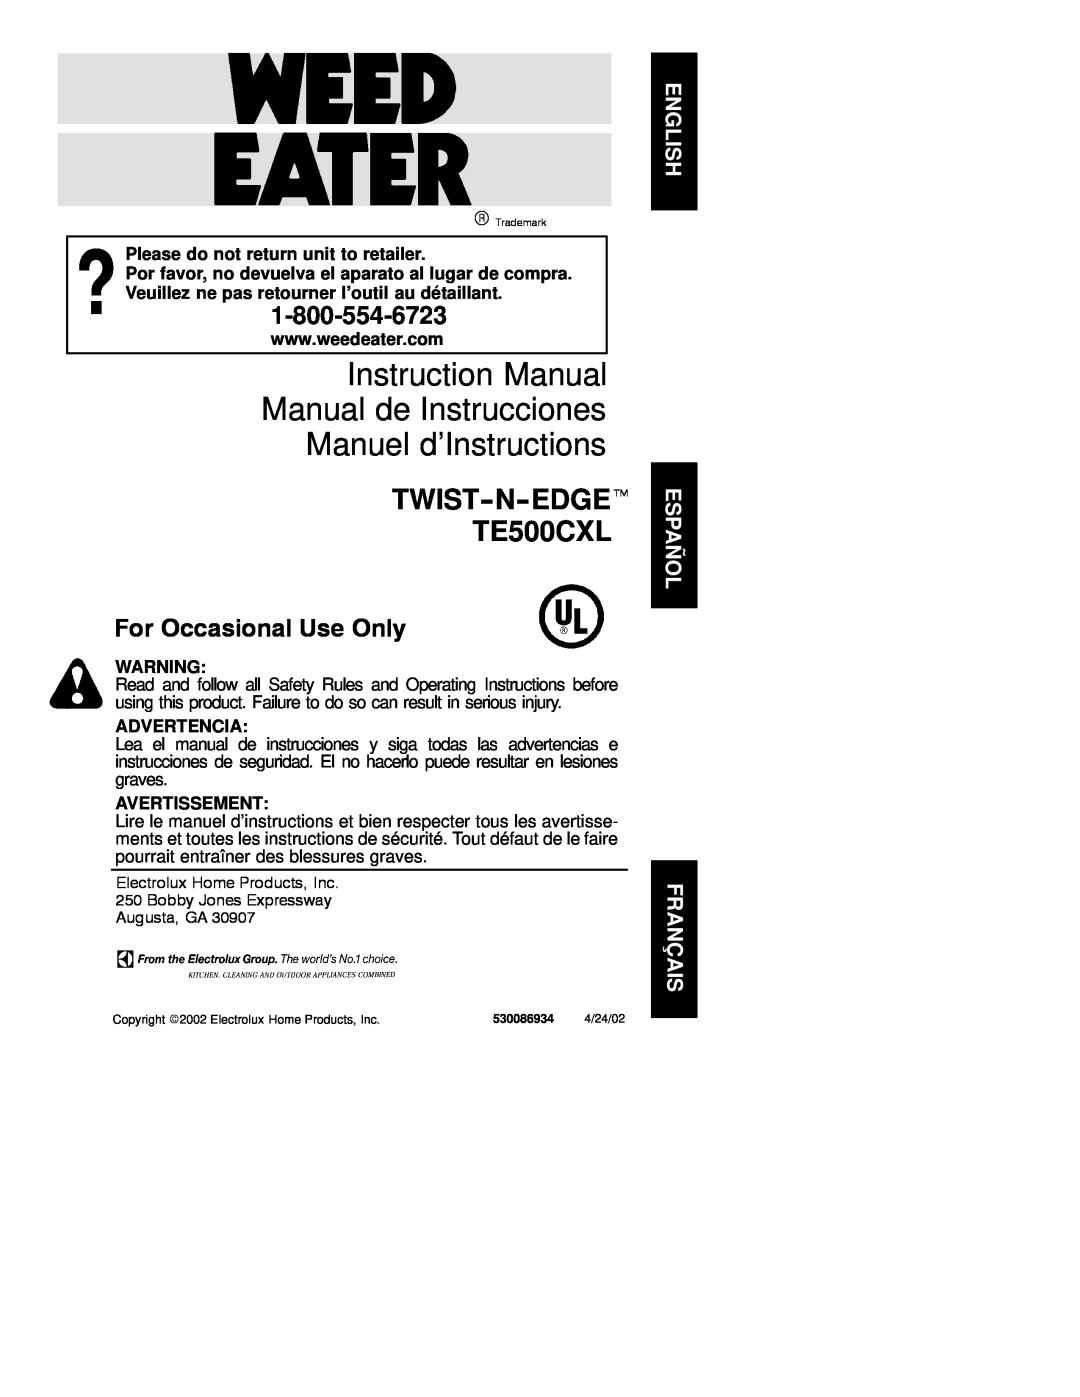 Weed Eater 530086934 instruction manual TWIST-N-EDGEt TE500CXL, For Occasional Use Only, Advertencia, Avertissement 